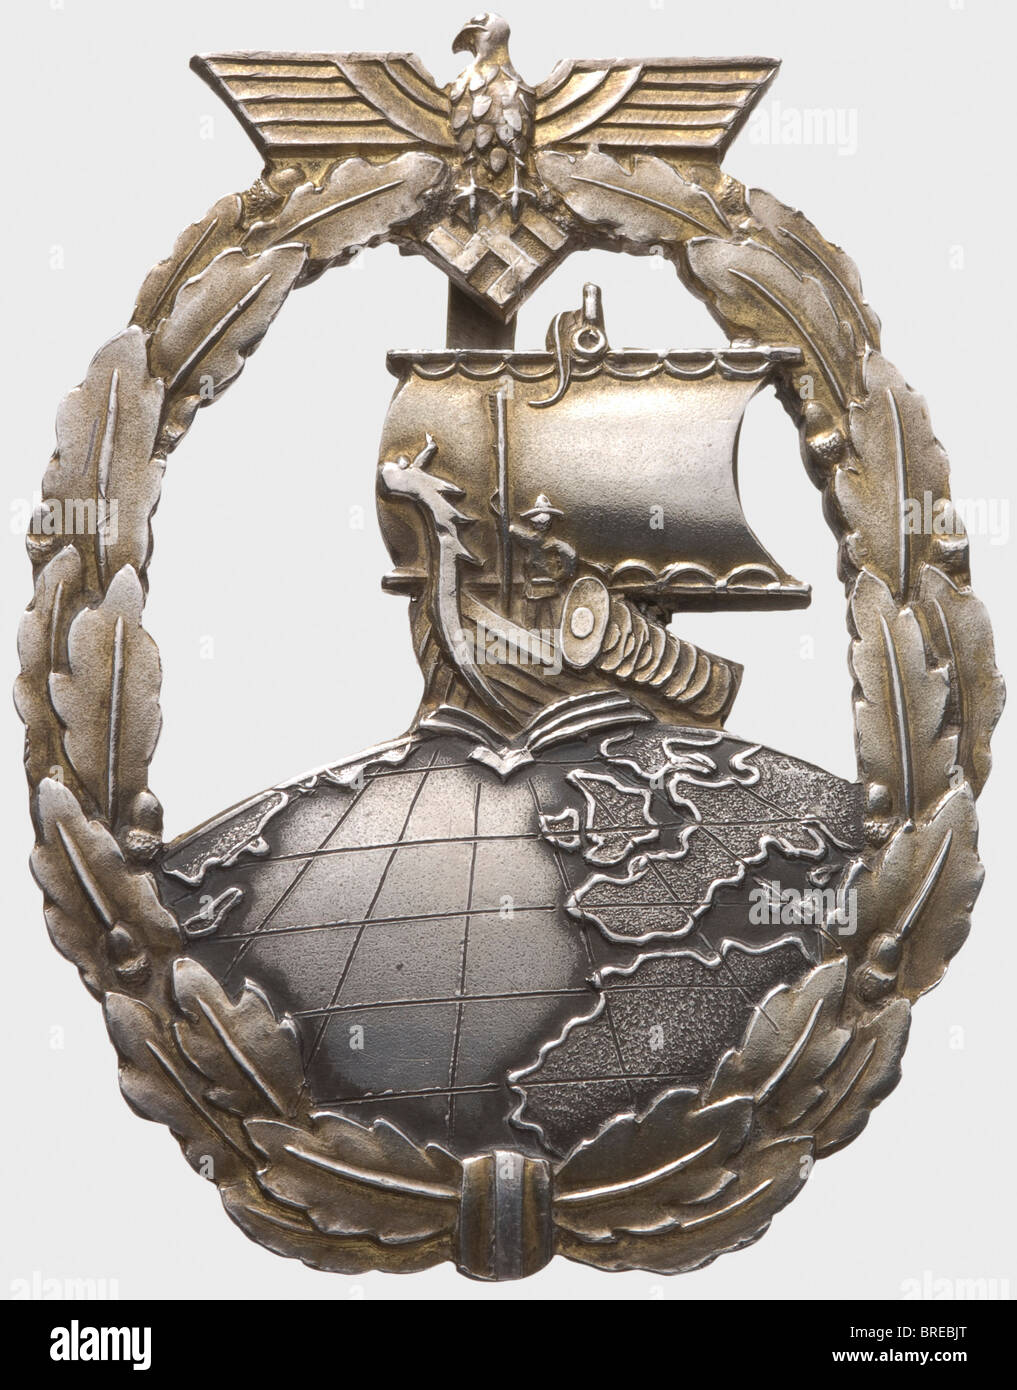 A Auxiliary Cruisers War Badge in sterling silver, for the crew of auxiliary cruiser 'Thor' One-piece silver version with gilt wreath and Viking ship, the globe with incised latitude and longitude lines. Reverse wide attachment pin, punched 'Sterling' as well as weakly inscribed wearer's name 'Georg König(?)'. Weight 47.5 g. On her second cruise (12 January - 30 November 1942) 'Thor' sank 57,032 GRT of enemy shipping and made port at Yokohama to take on fuel and supplies. On this occasion the awards, for want of standard service issue badges, were provided on c, Stock Photo